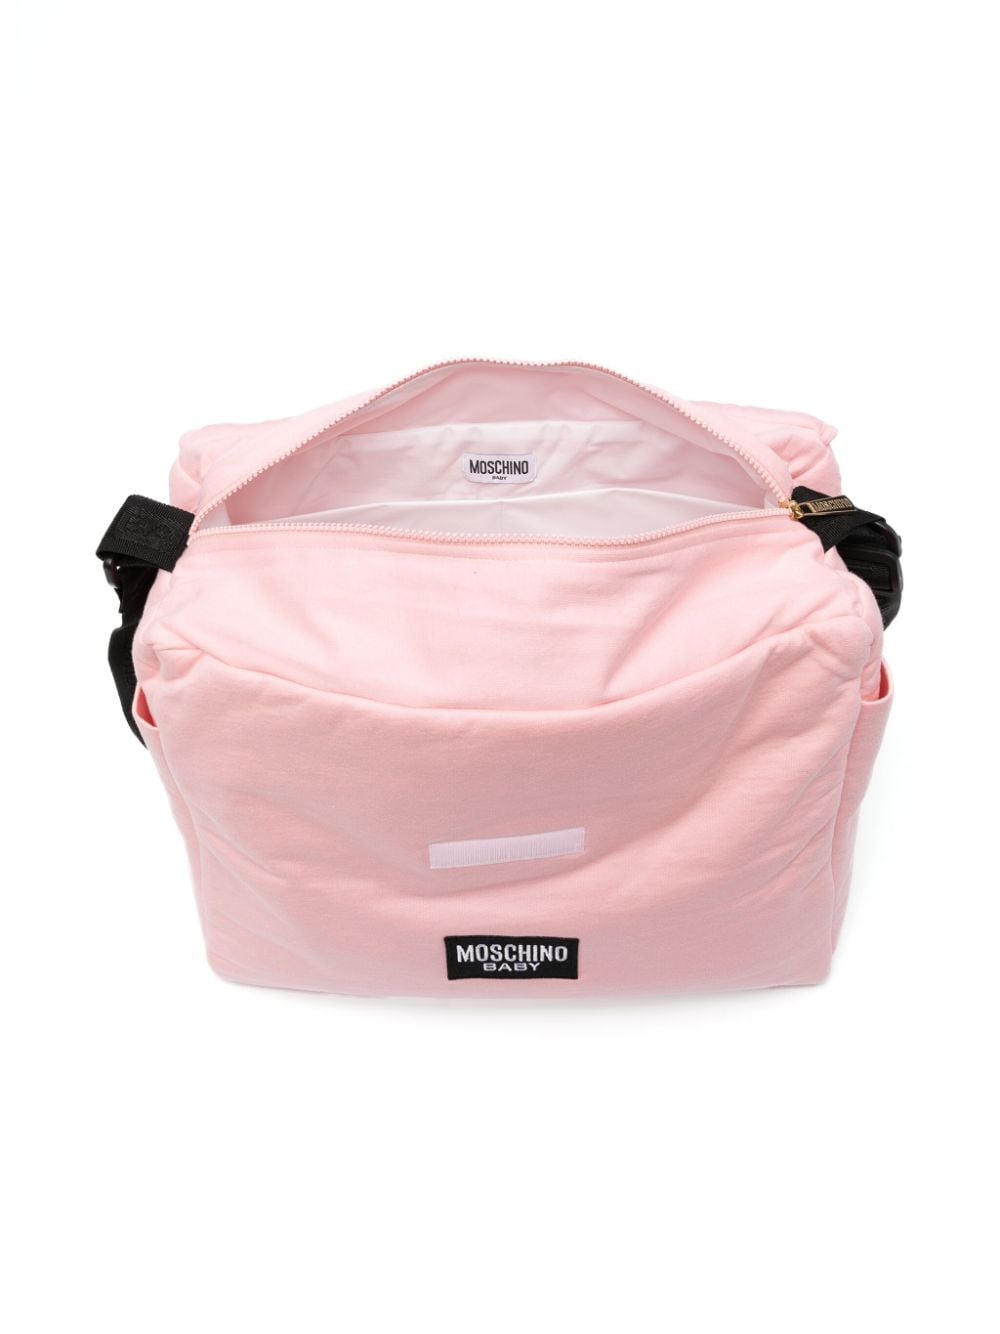 Mother's bag for baby girl in light pink cotton